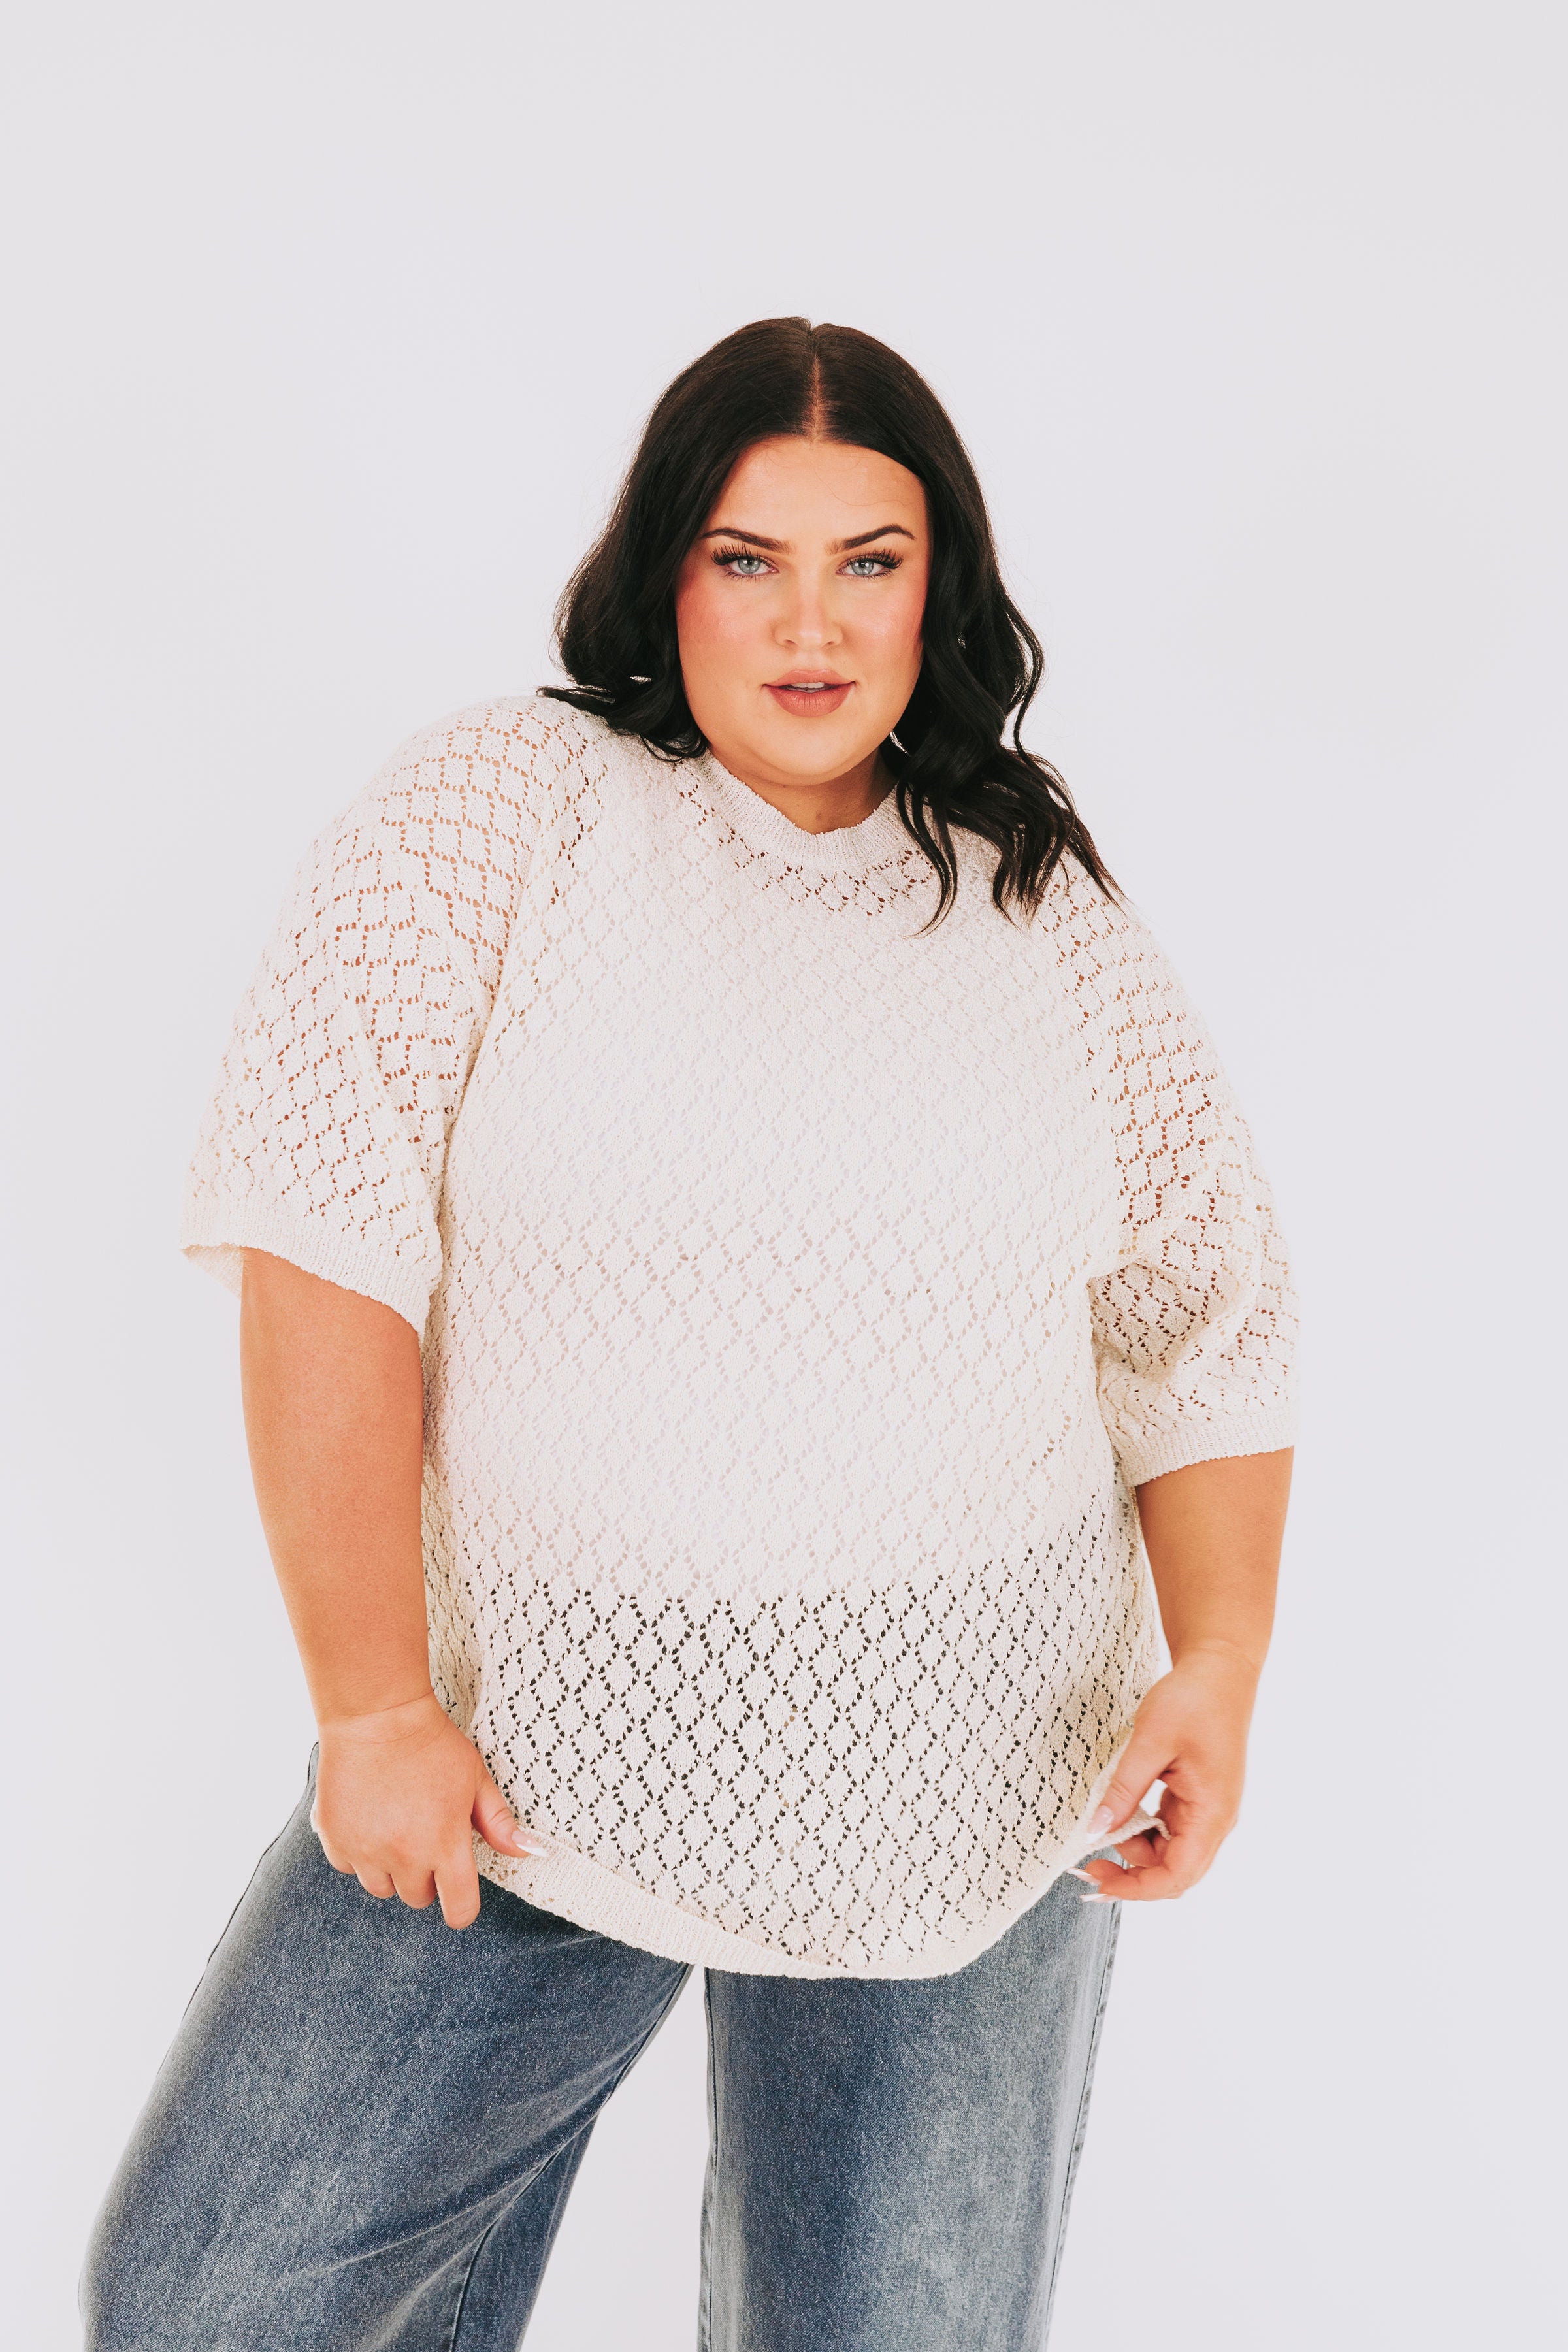 PLUS SIZE - All I Ever Wanted Top